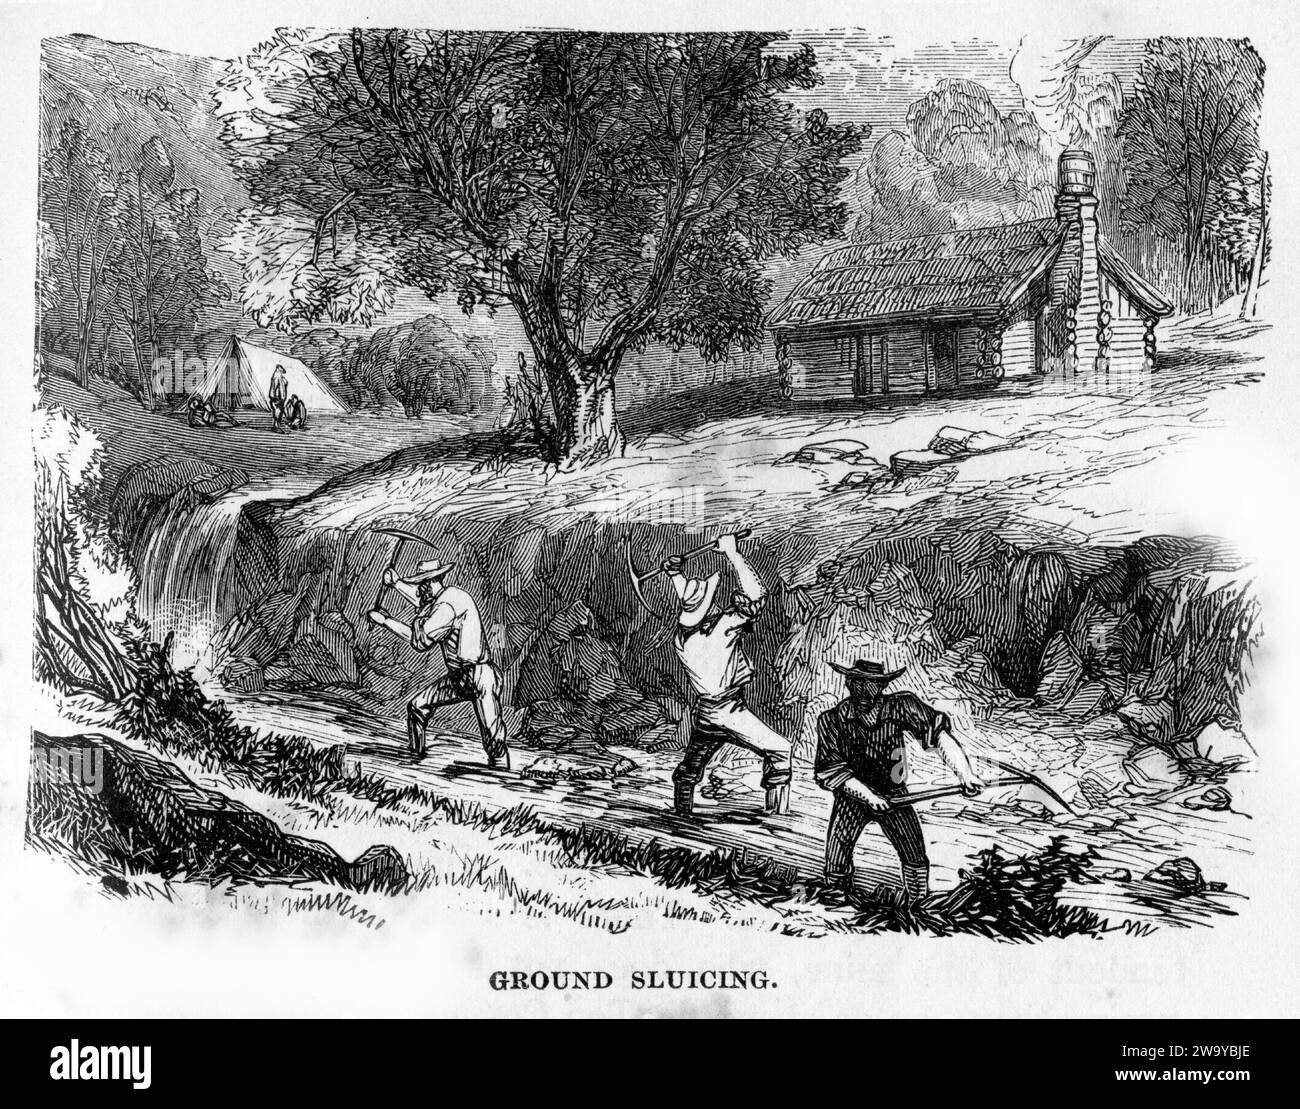 Engraving of a ground sluicing operation on an alluvial goldfield, common practice throughout the USA, New Zealand and Australia during the late 1800s, from The Underground World, circa 1878 Stock Photo